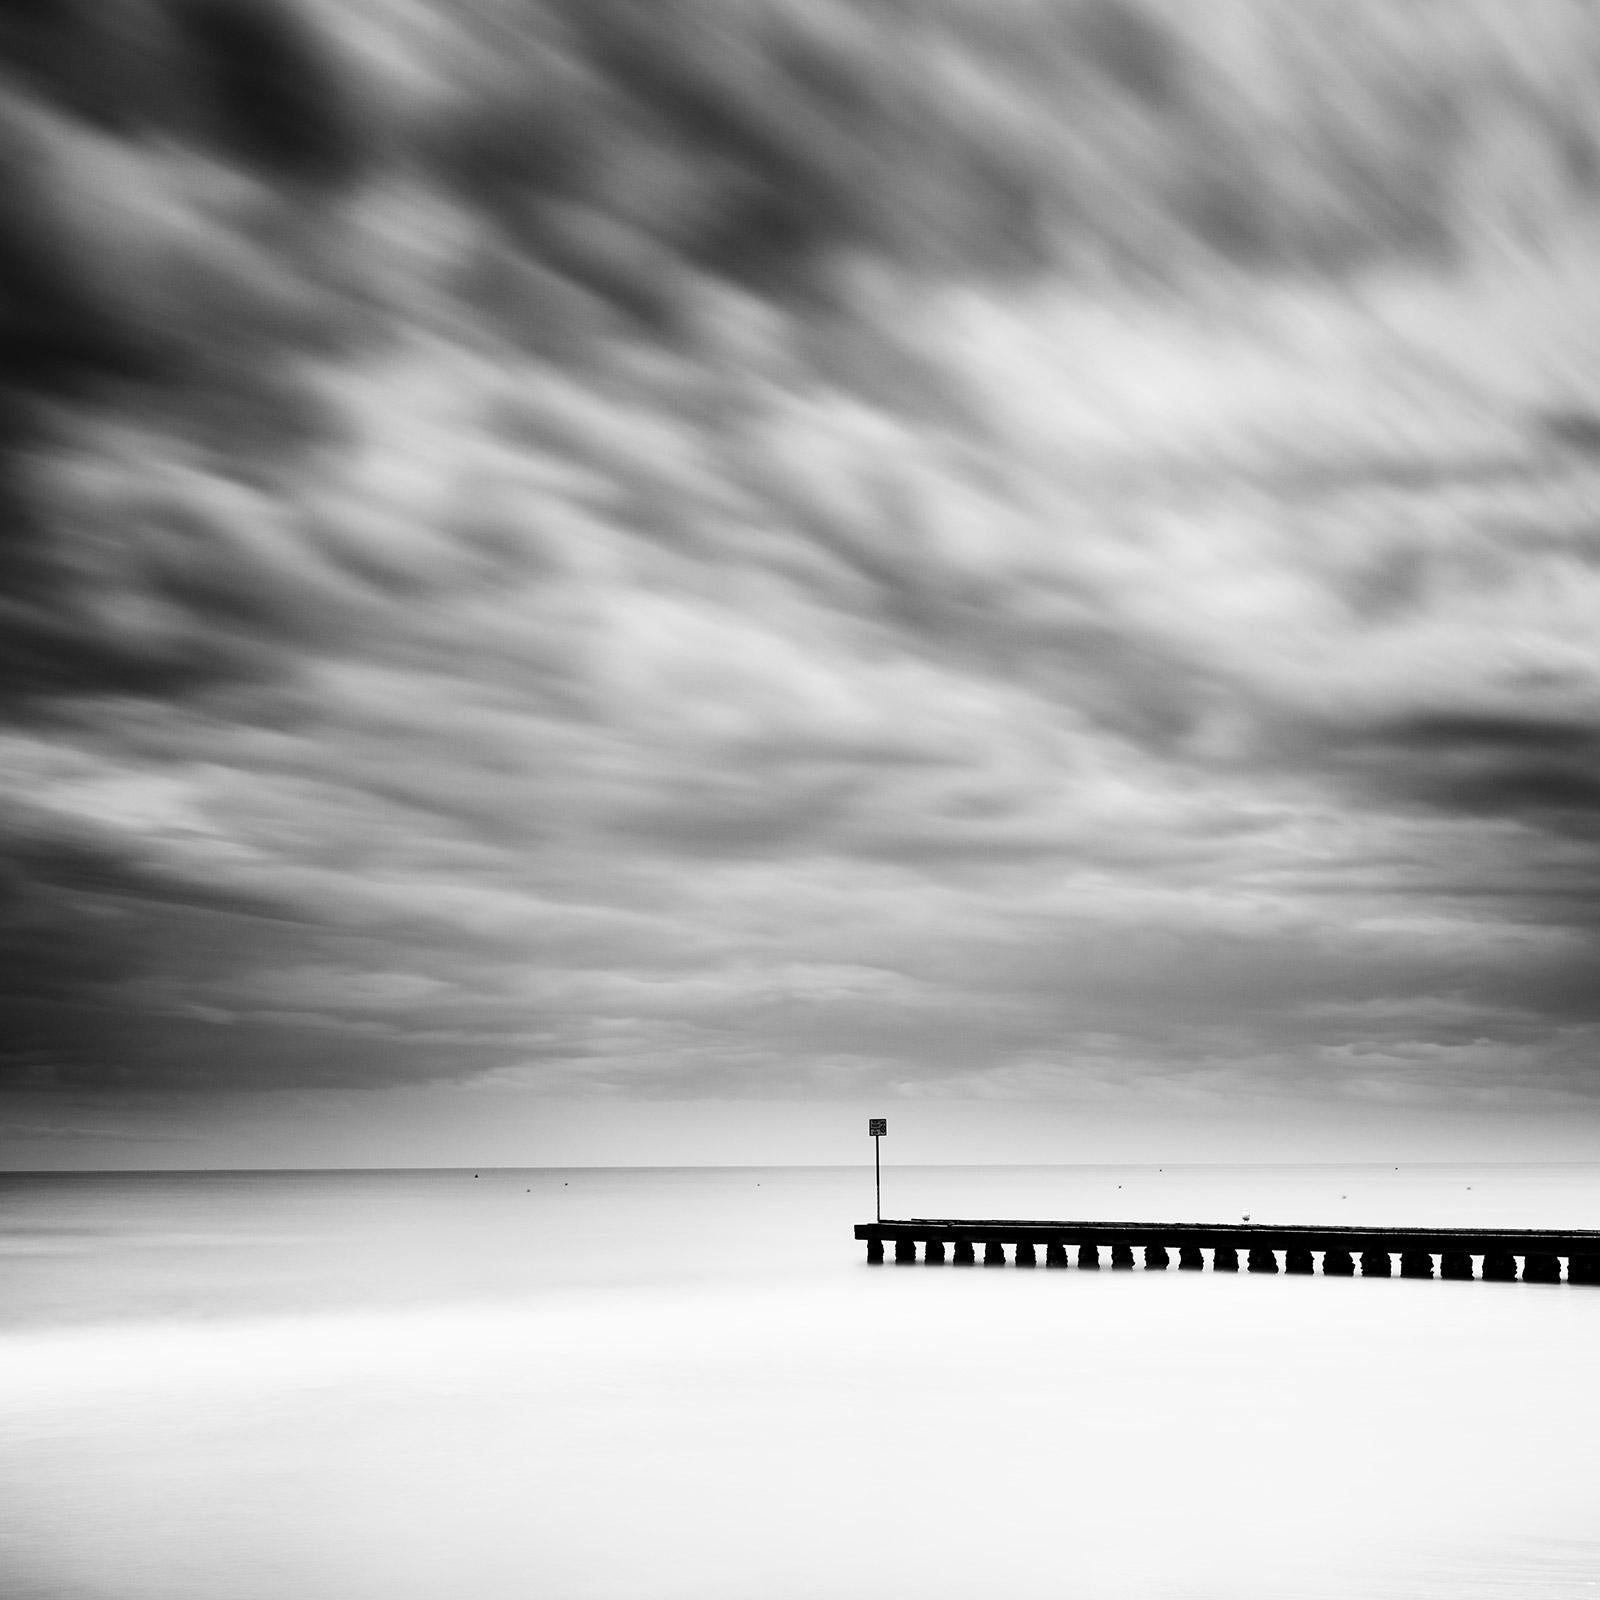 Gerald Berghammer Landscape Photograph - Wooden Pier in the Sea, black and white, long exposure photography, landscape